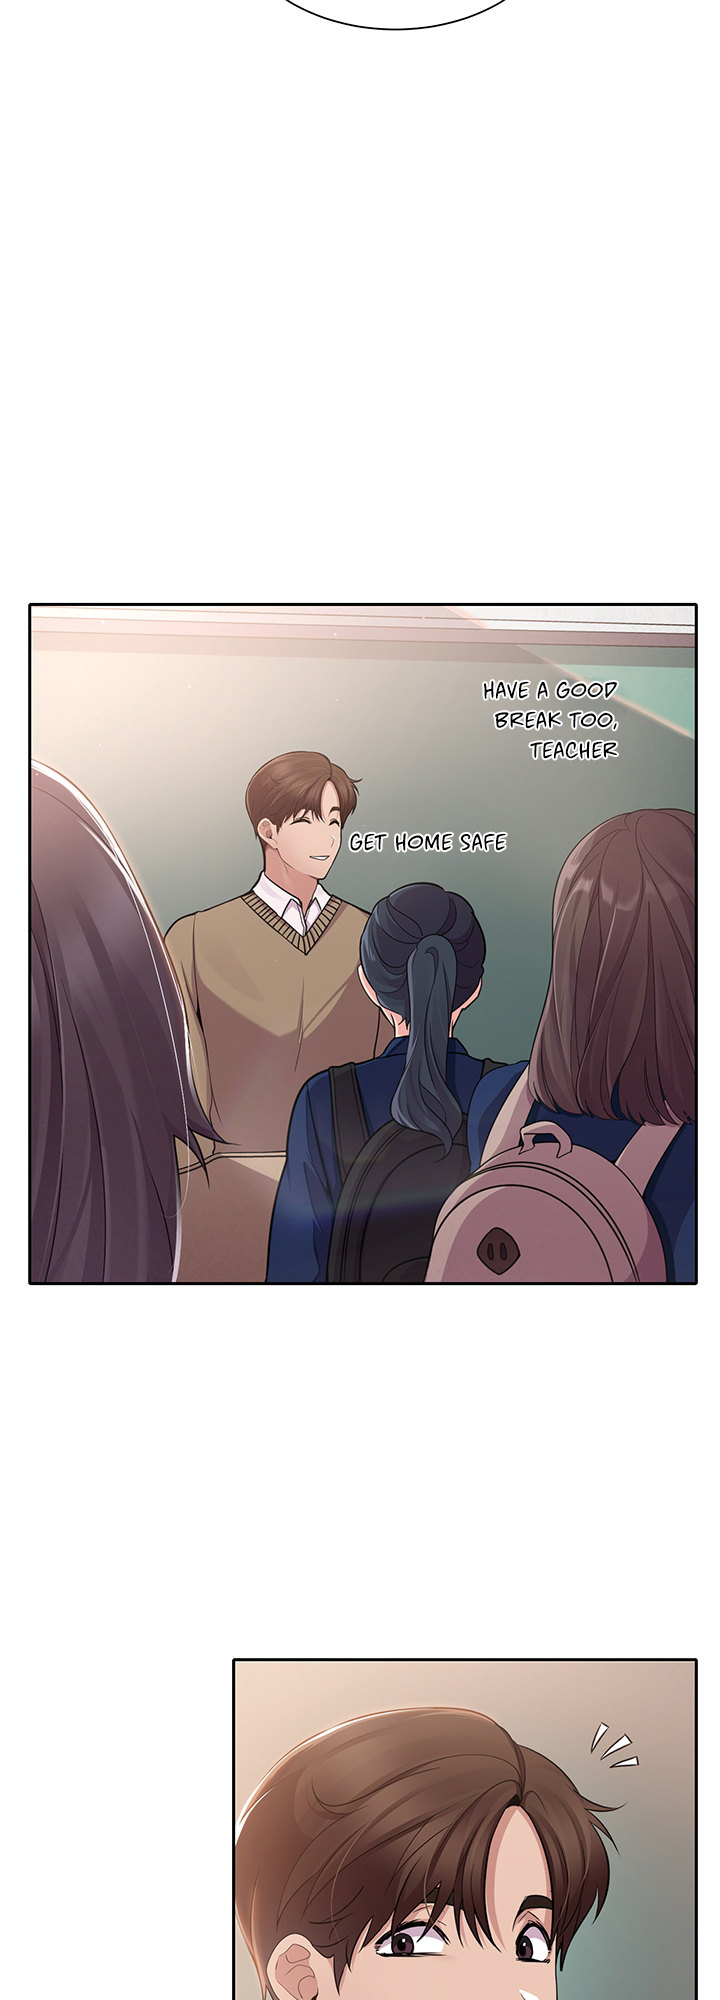 Meeting you again - Chapter 2 Page 3